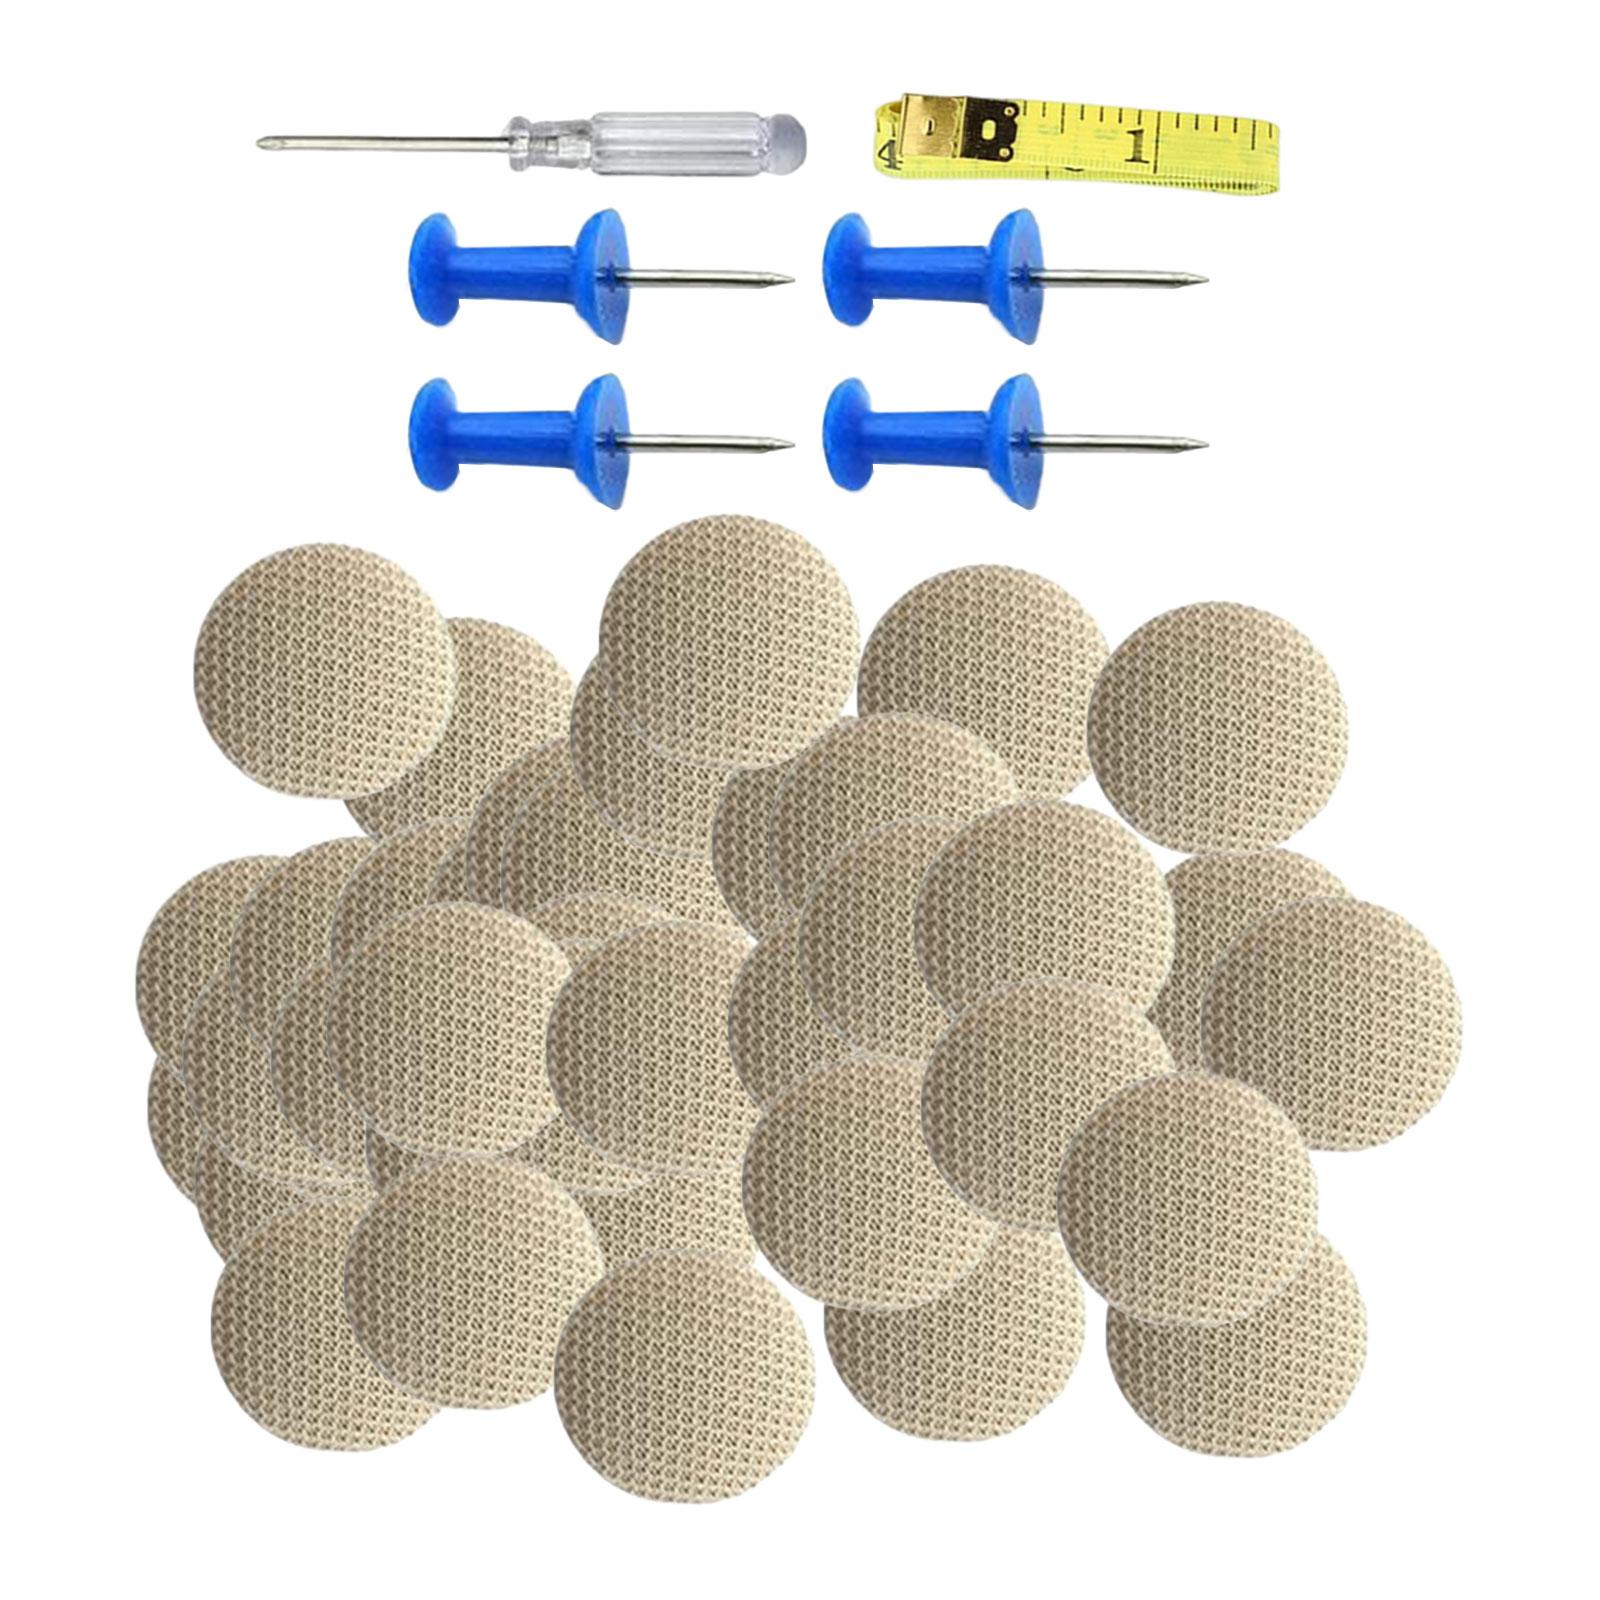 60 Pieces Car Roof Headliner Repair Button Auto Roof Snap Rivets Retainer